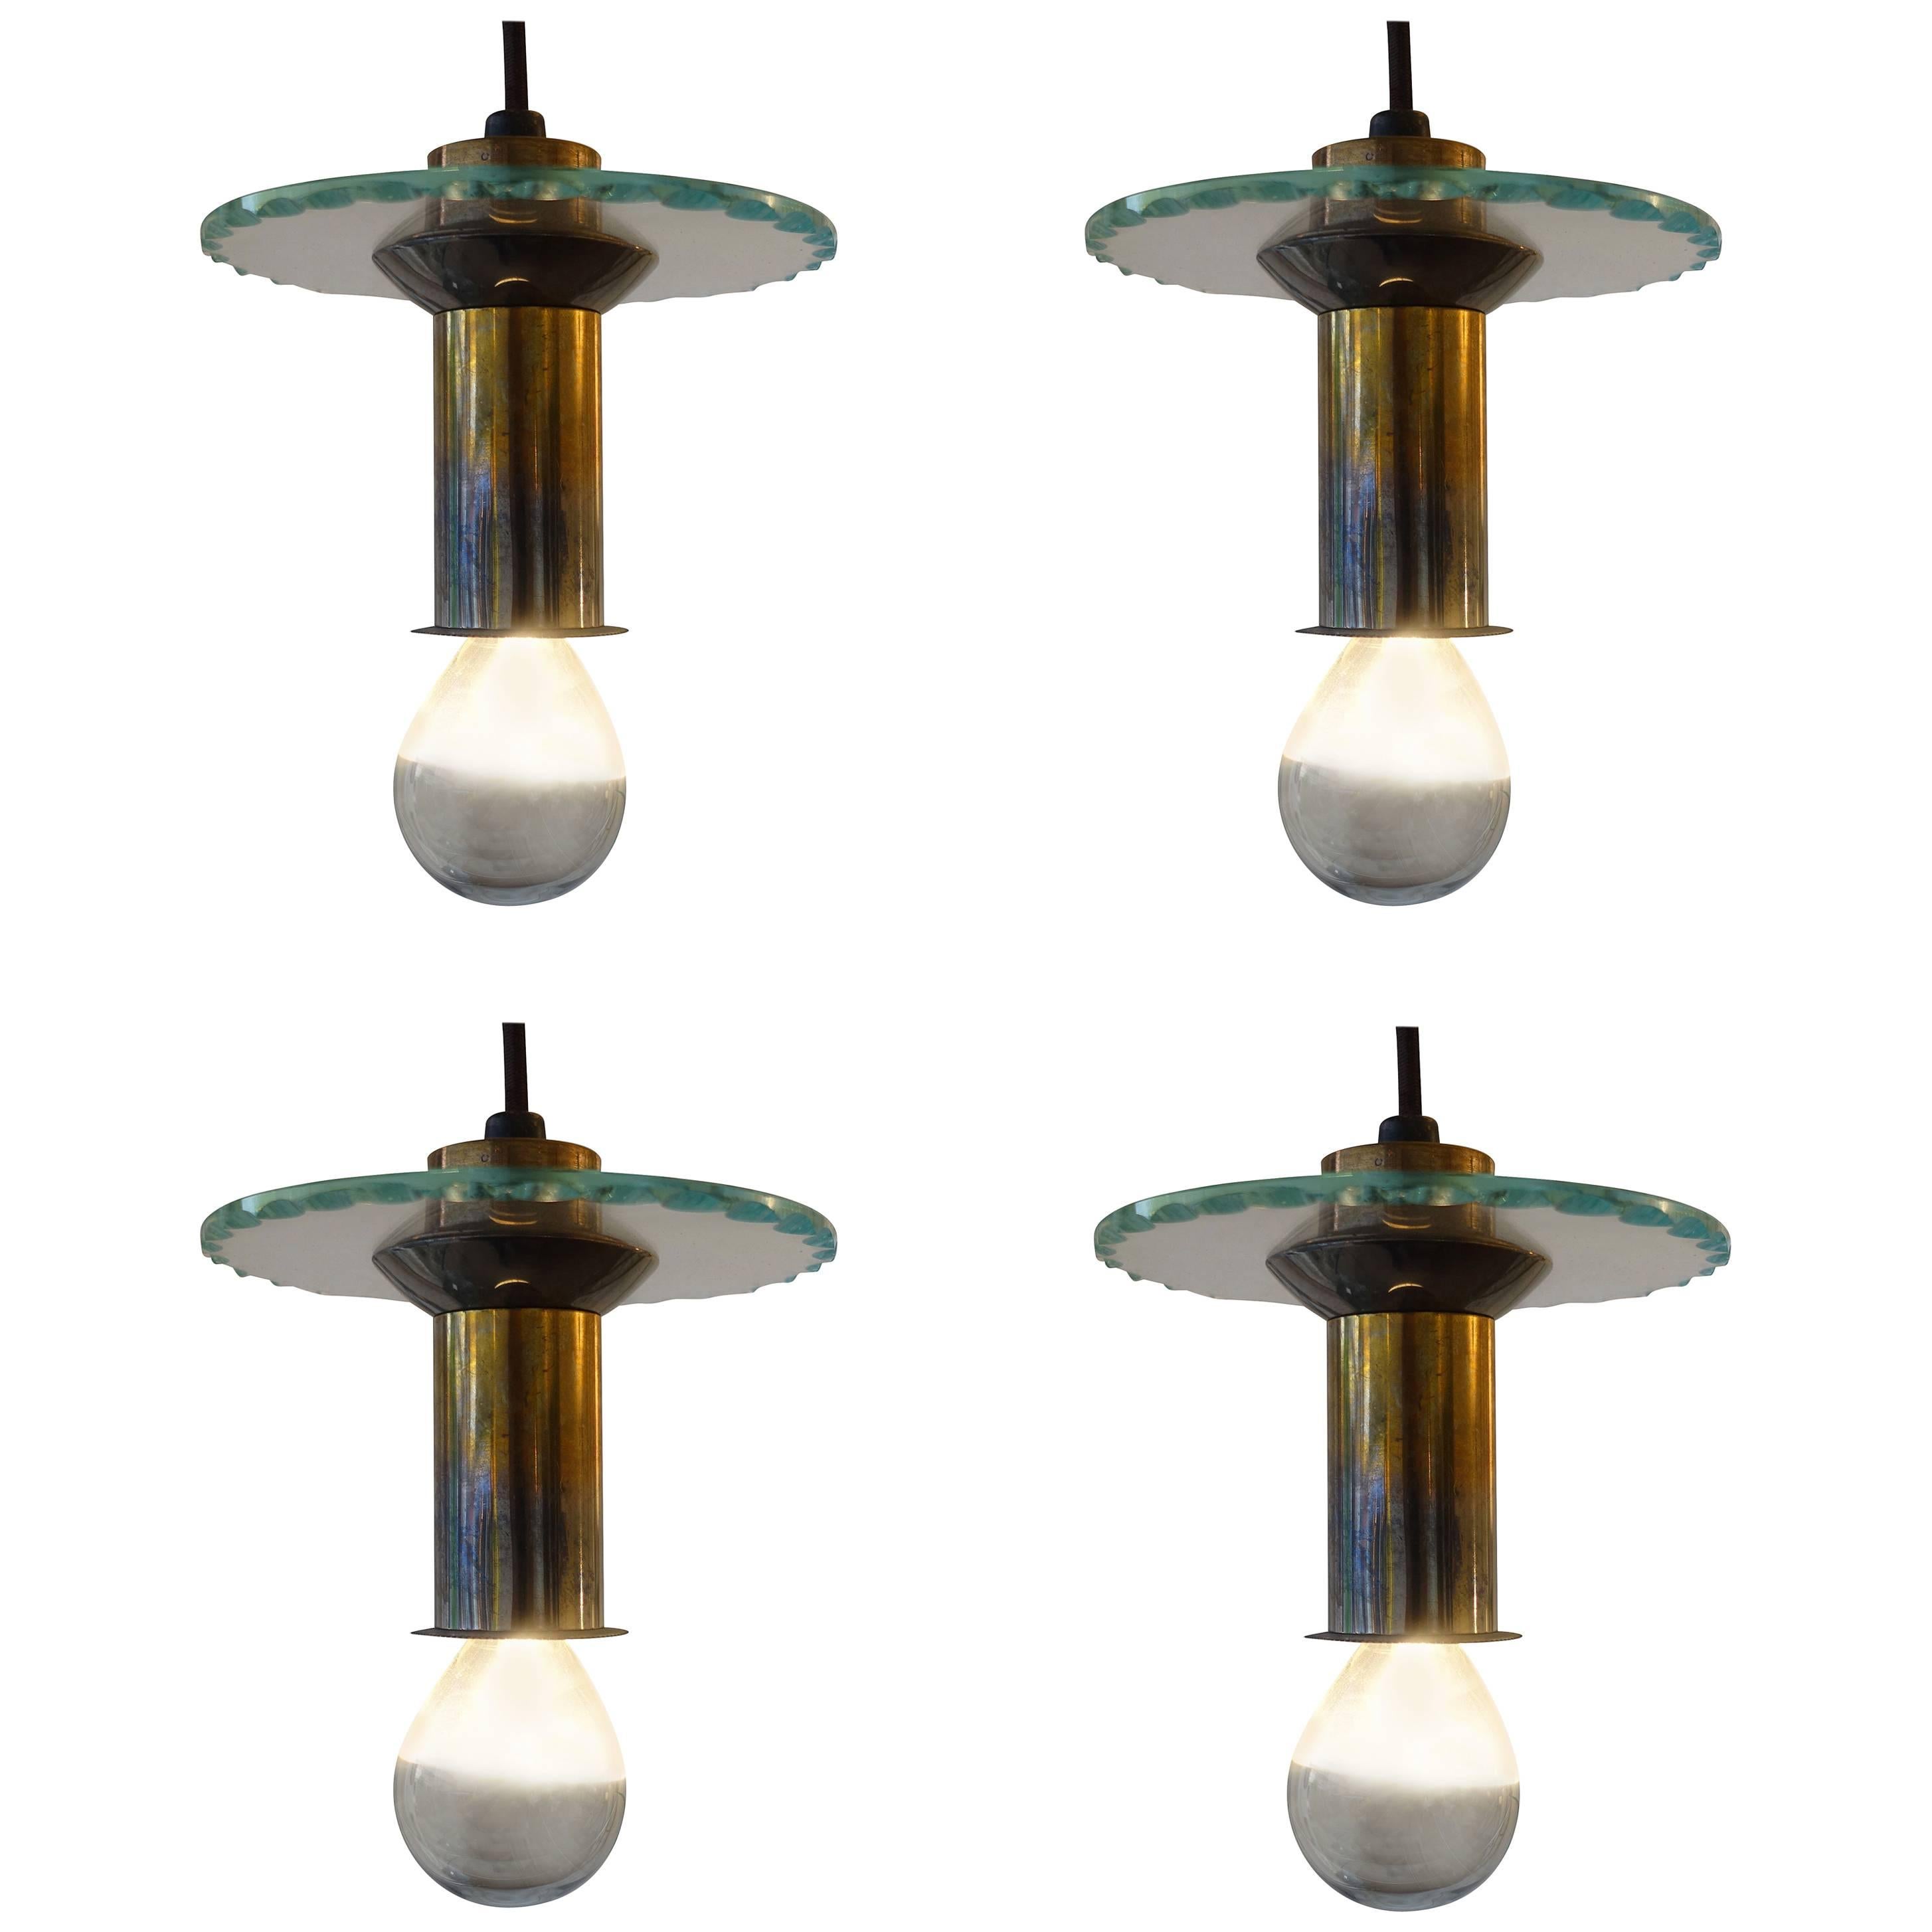 Set of Four Pendant Lights, Italy, 1940s